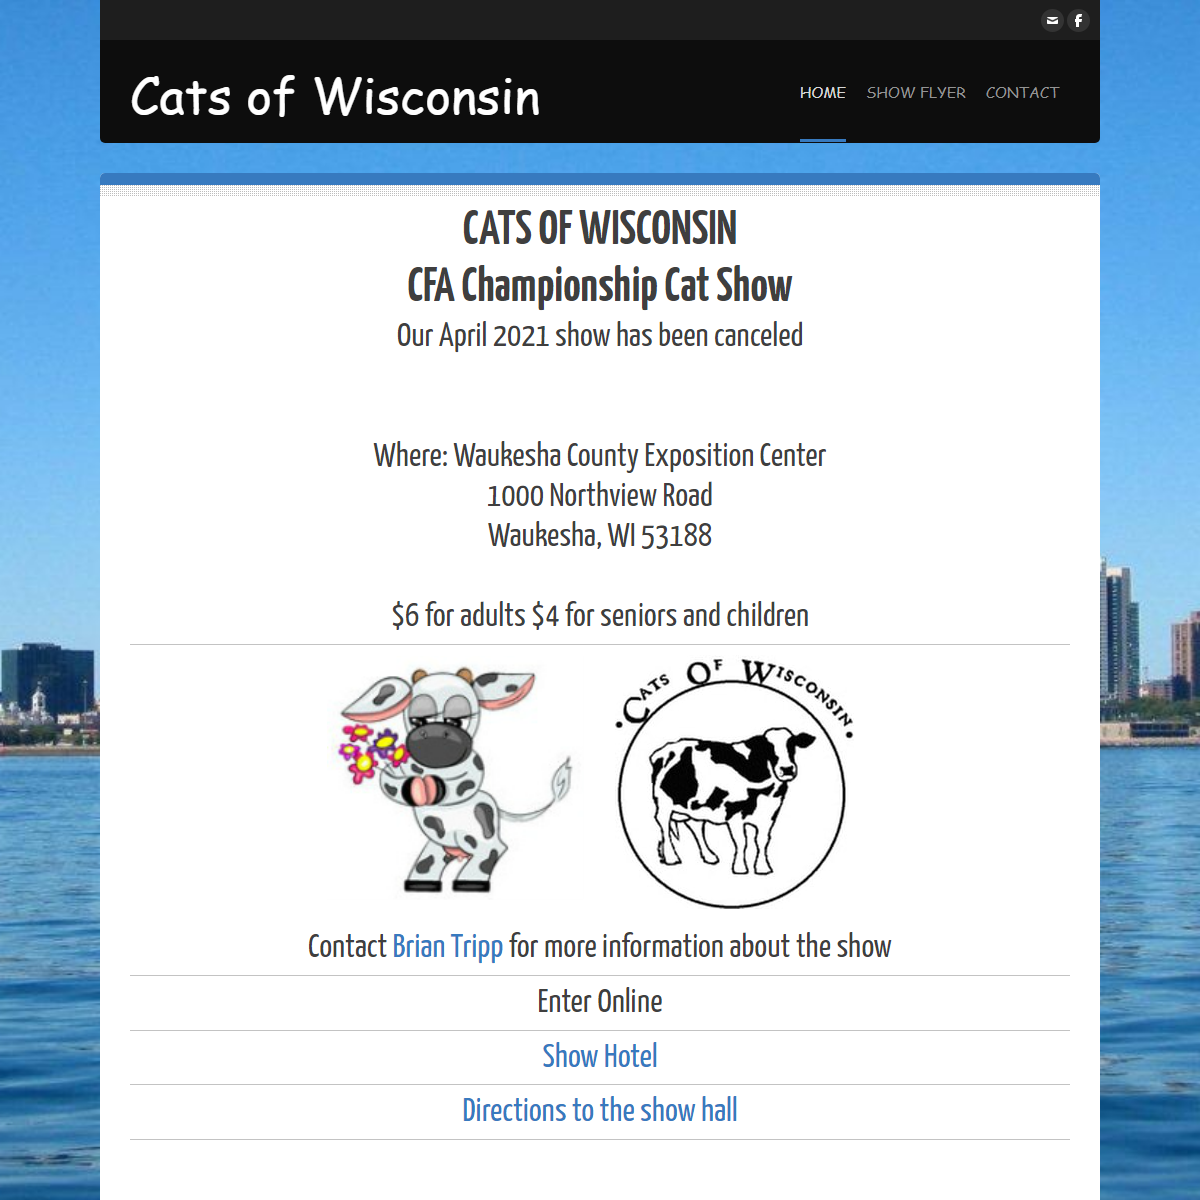 A complete backup of https://catsofwisconsin.weebly.com/